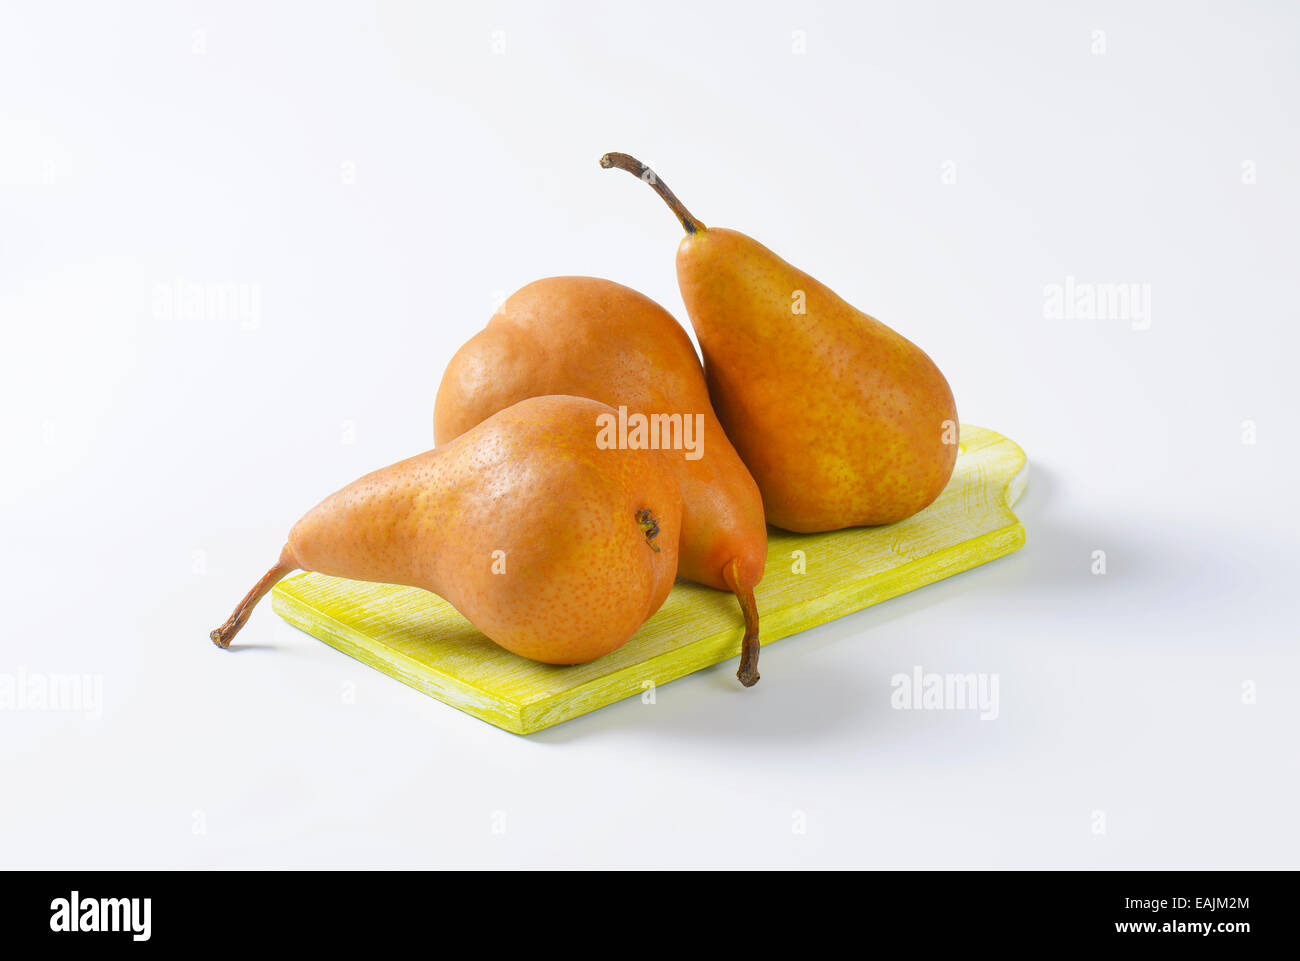 European pears with elongated slender neck and russeted skin Stock Photo